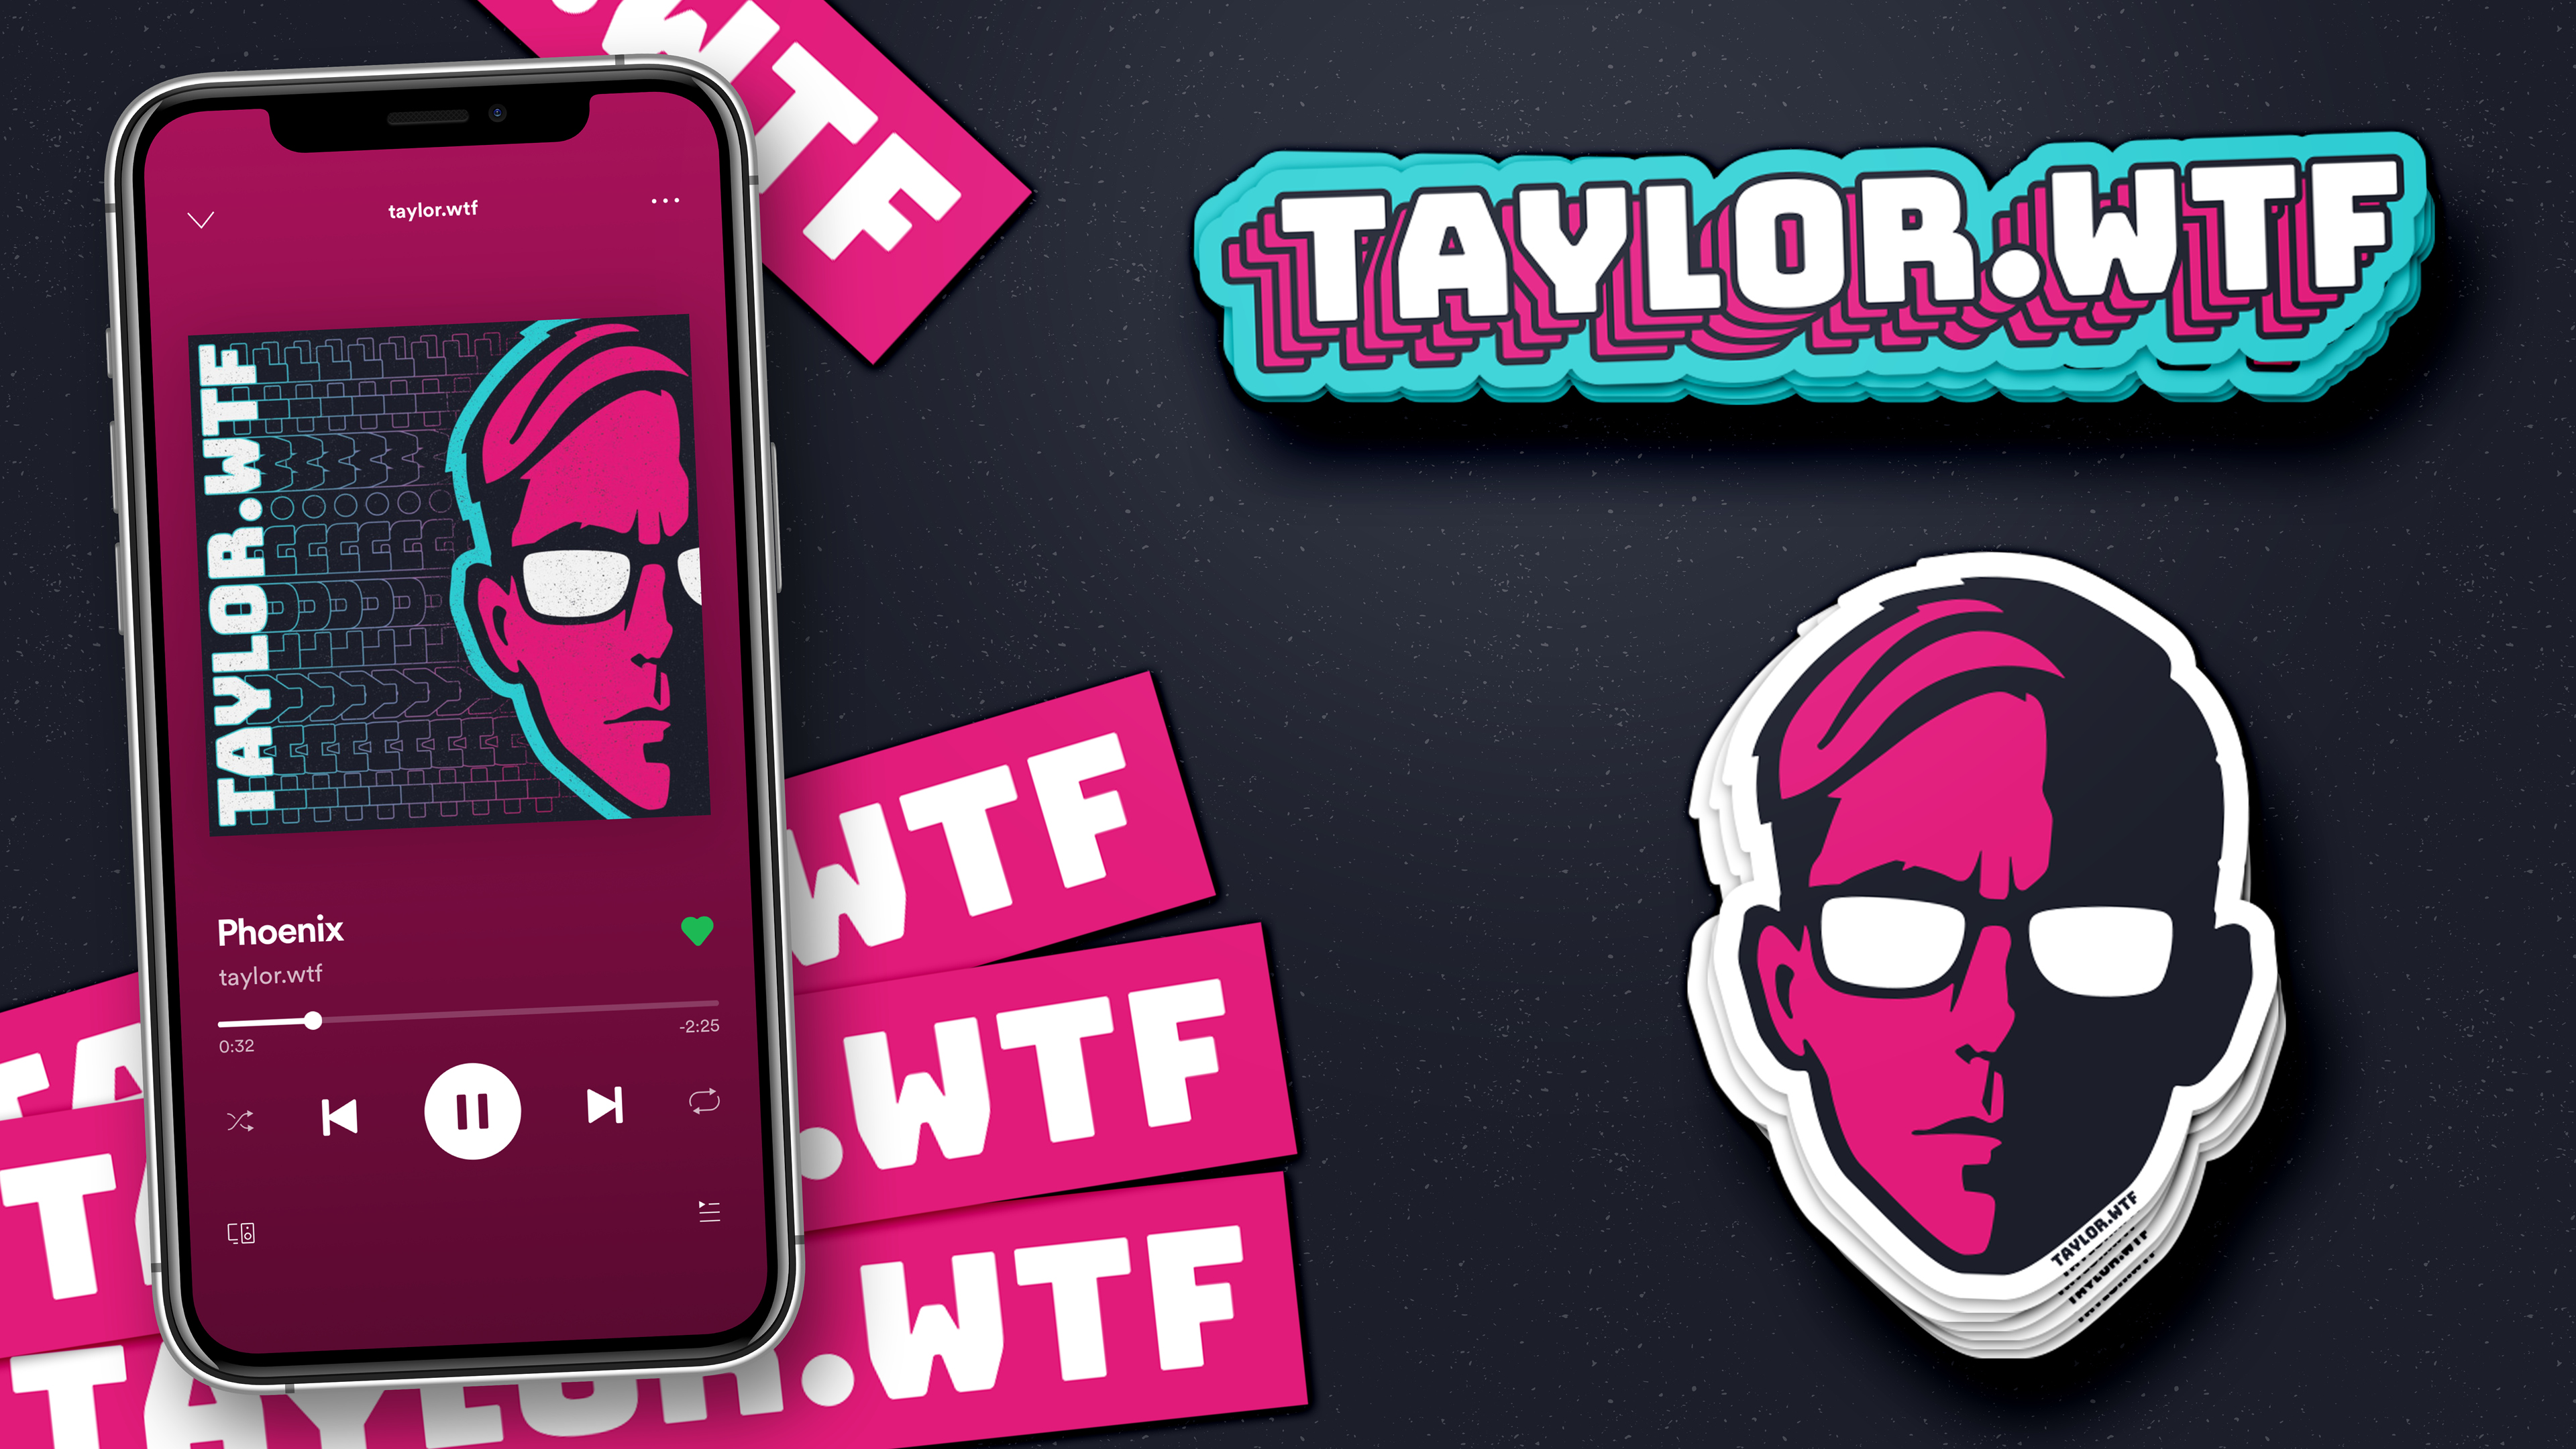 featured image:taylor.wtf Brand Identity & Album Cover